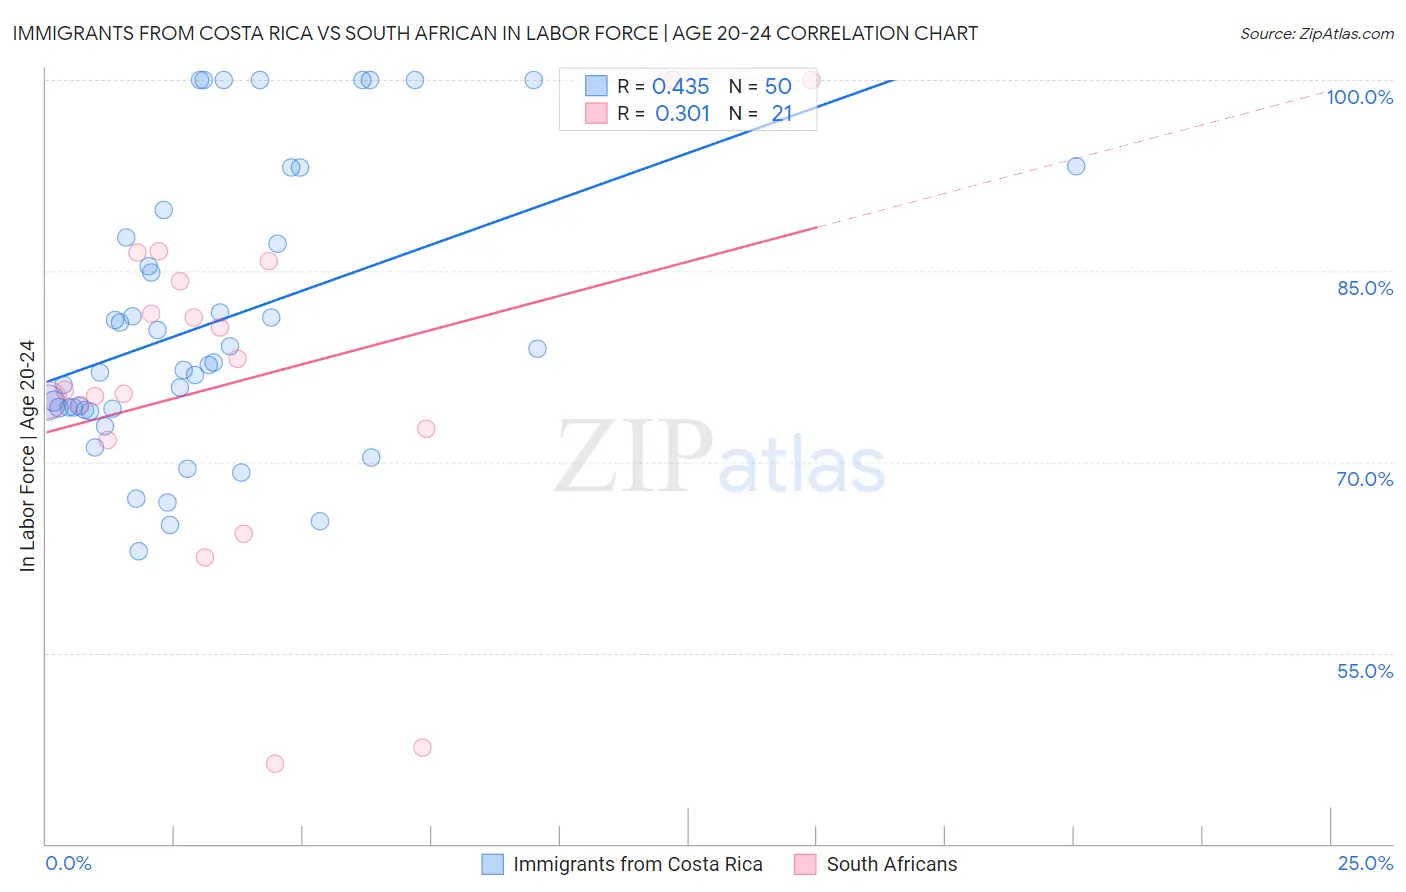 Immigrants from Costa Rica vs South African In Labor Force | Age 20-24